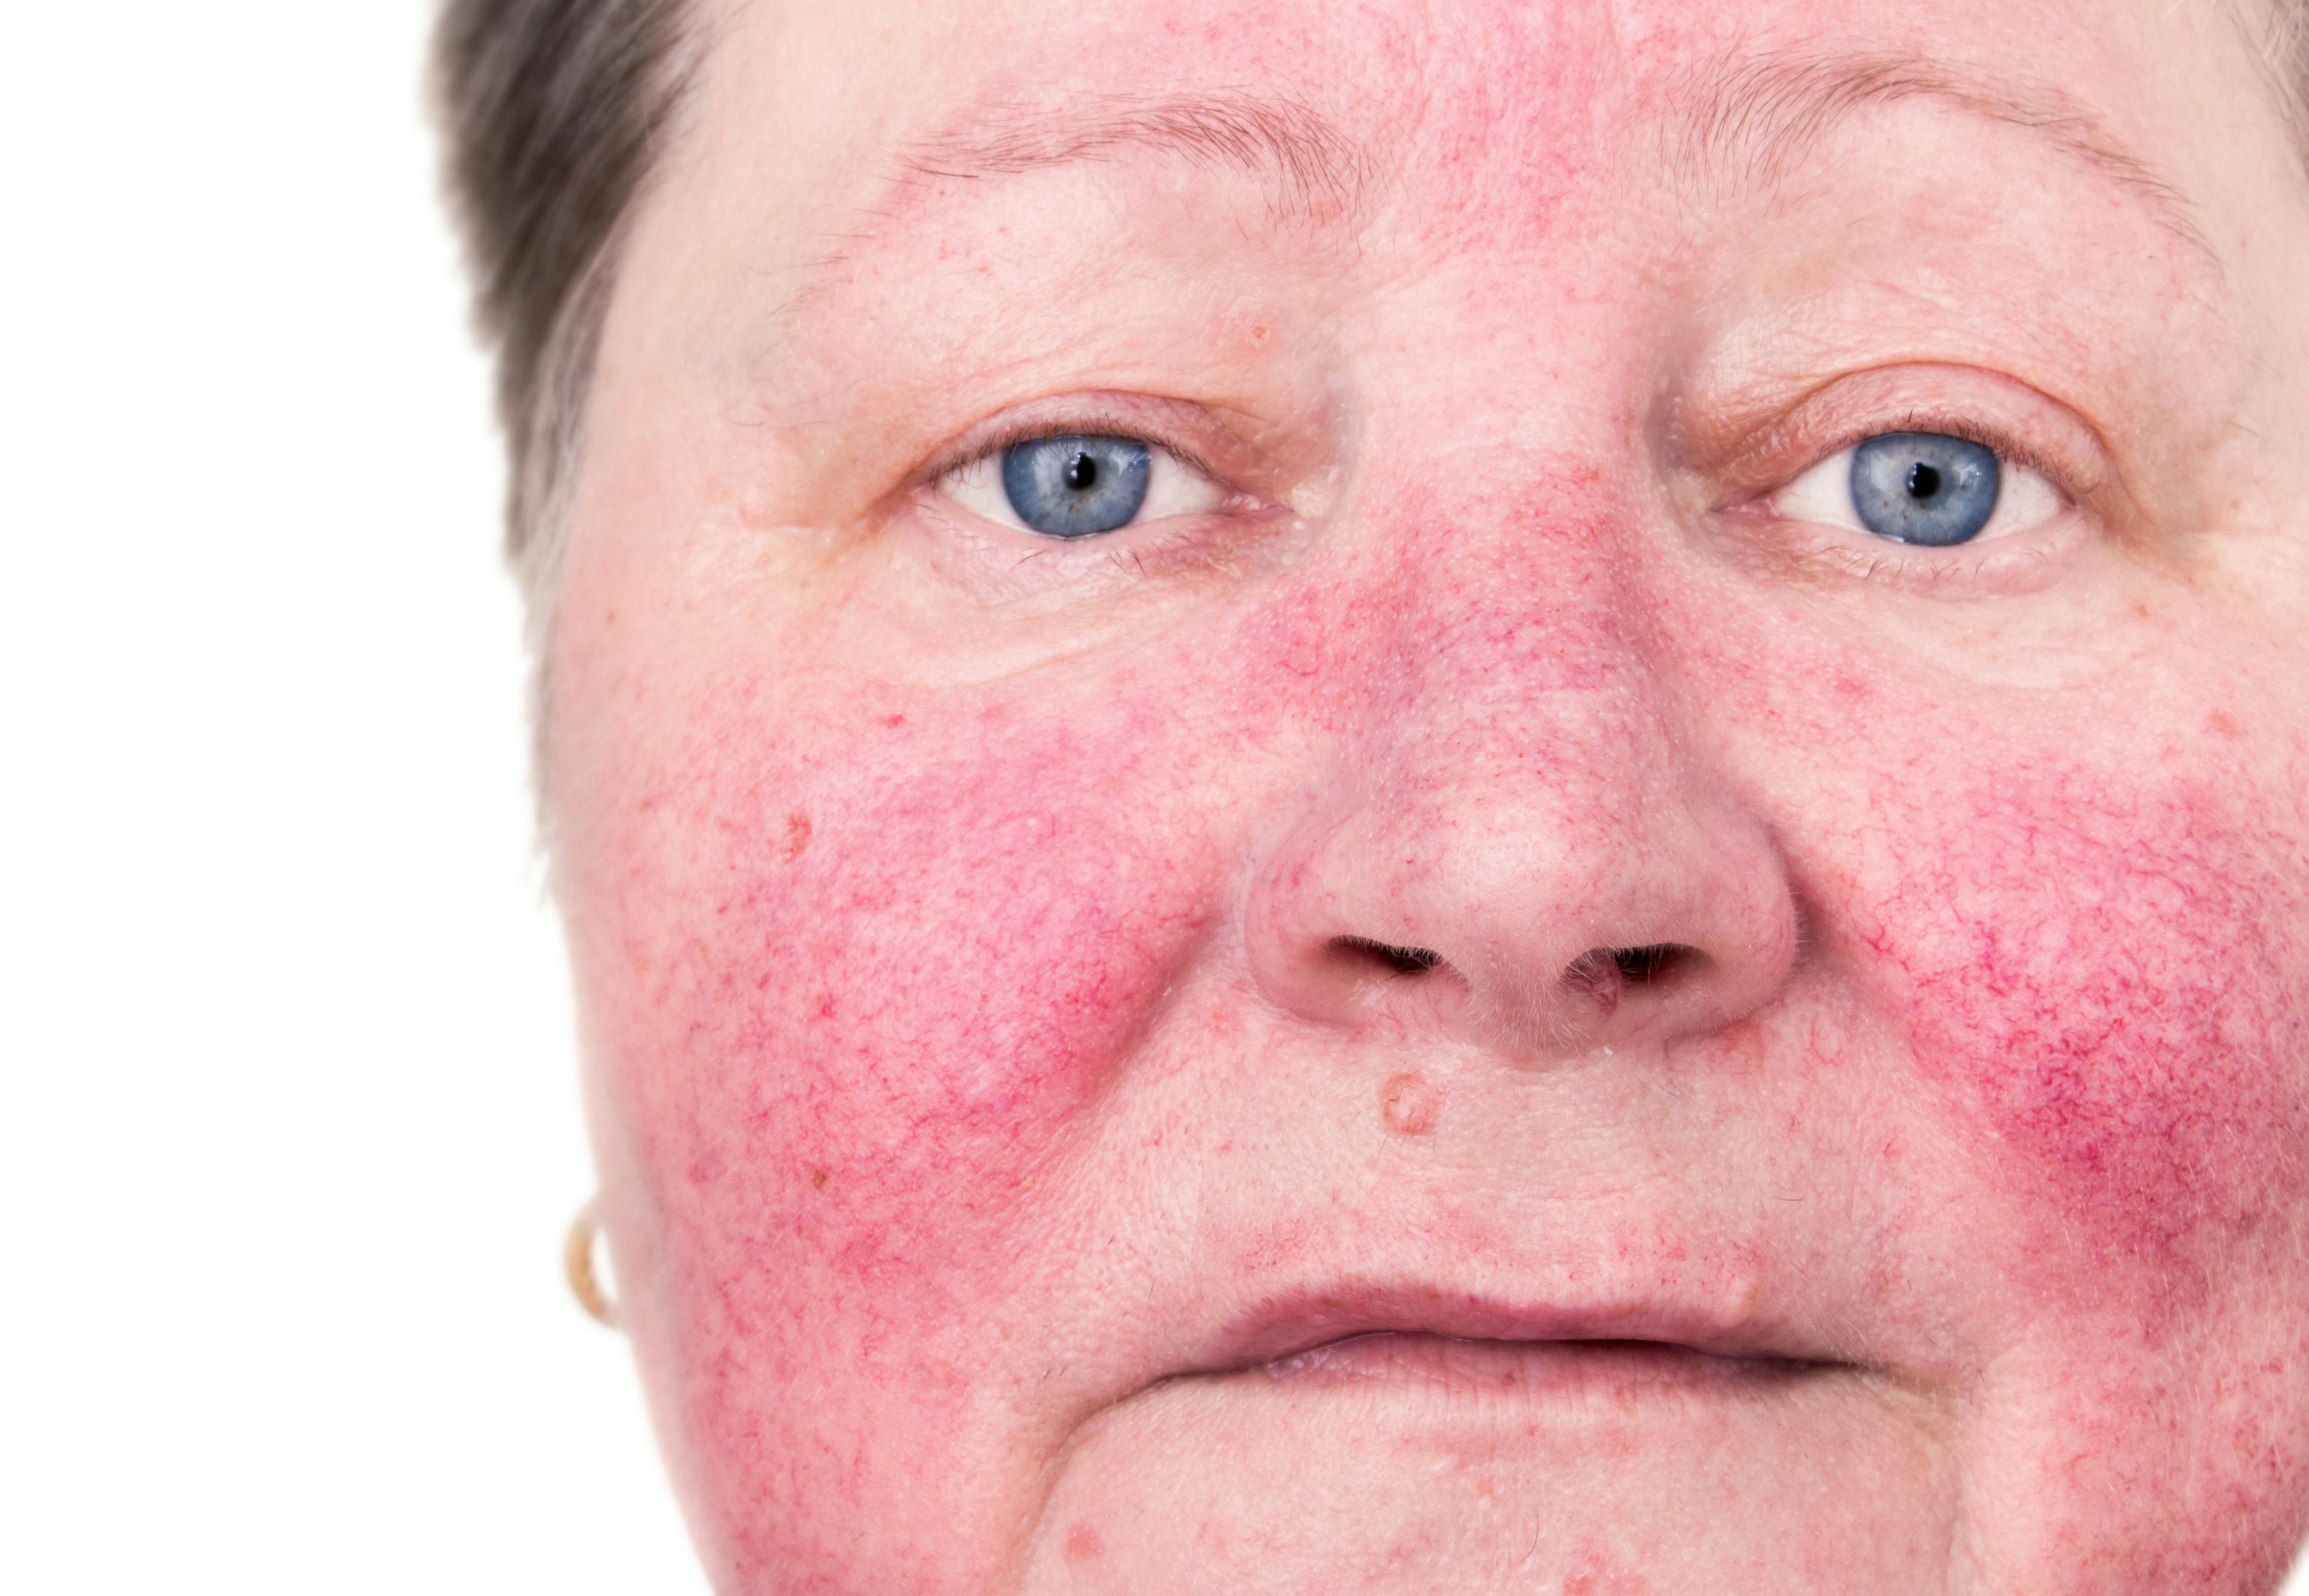 Woman with rosacea on the cheeks